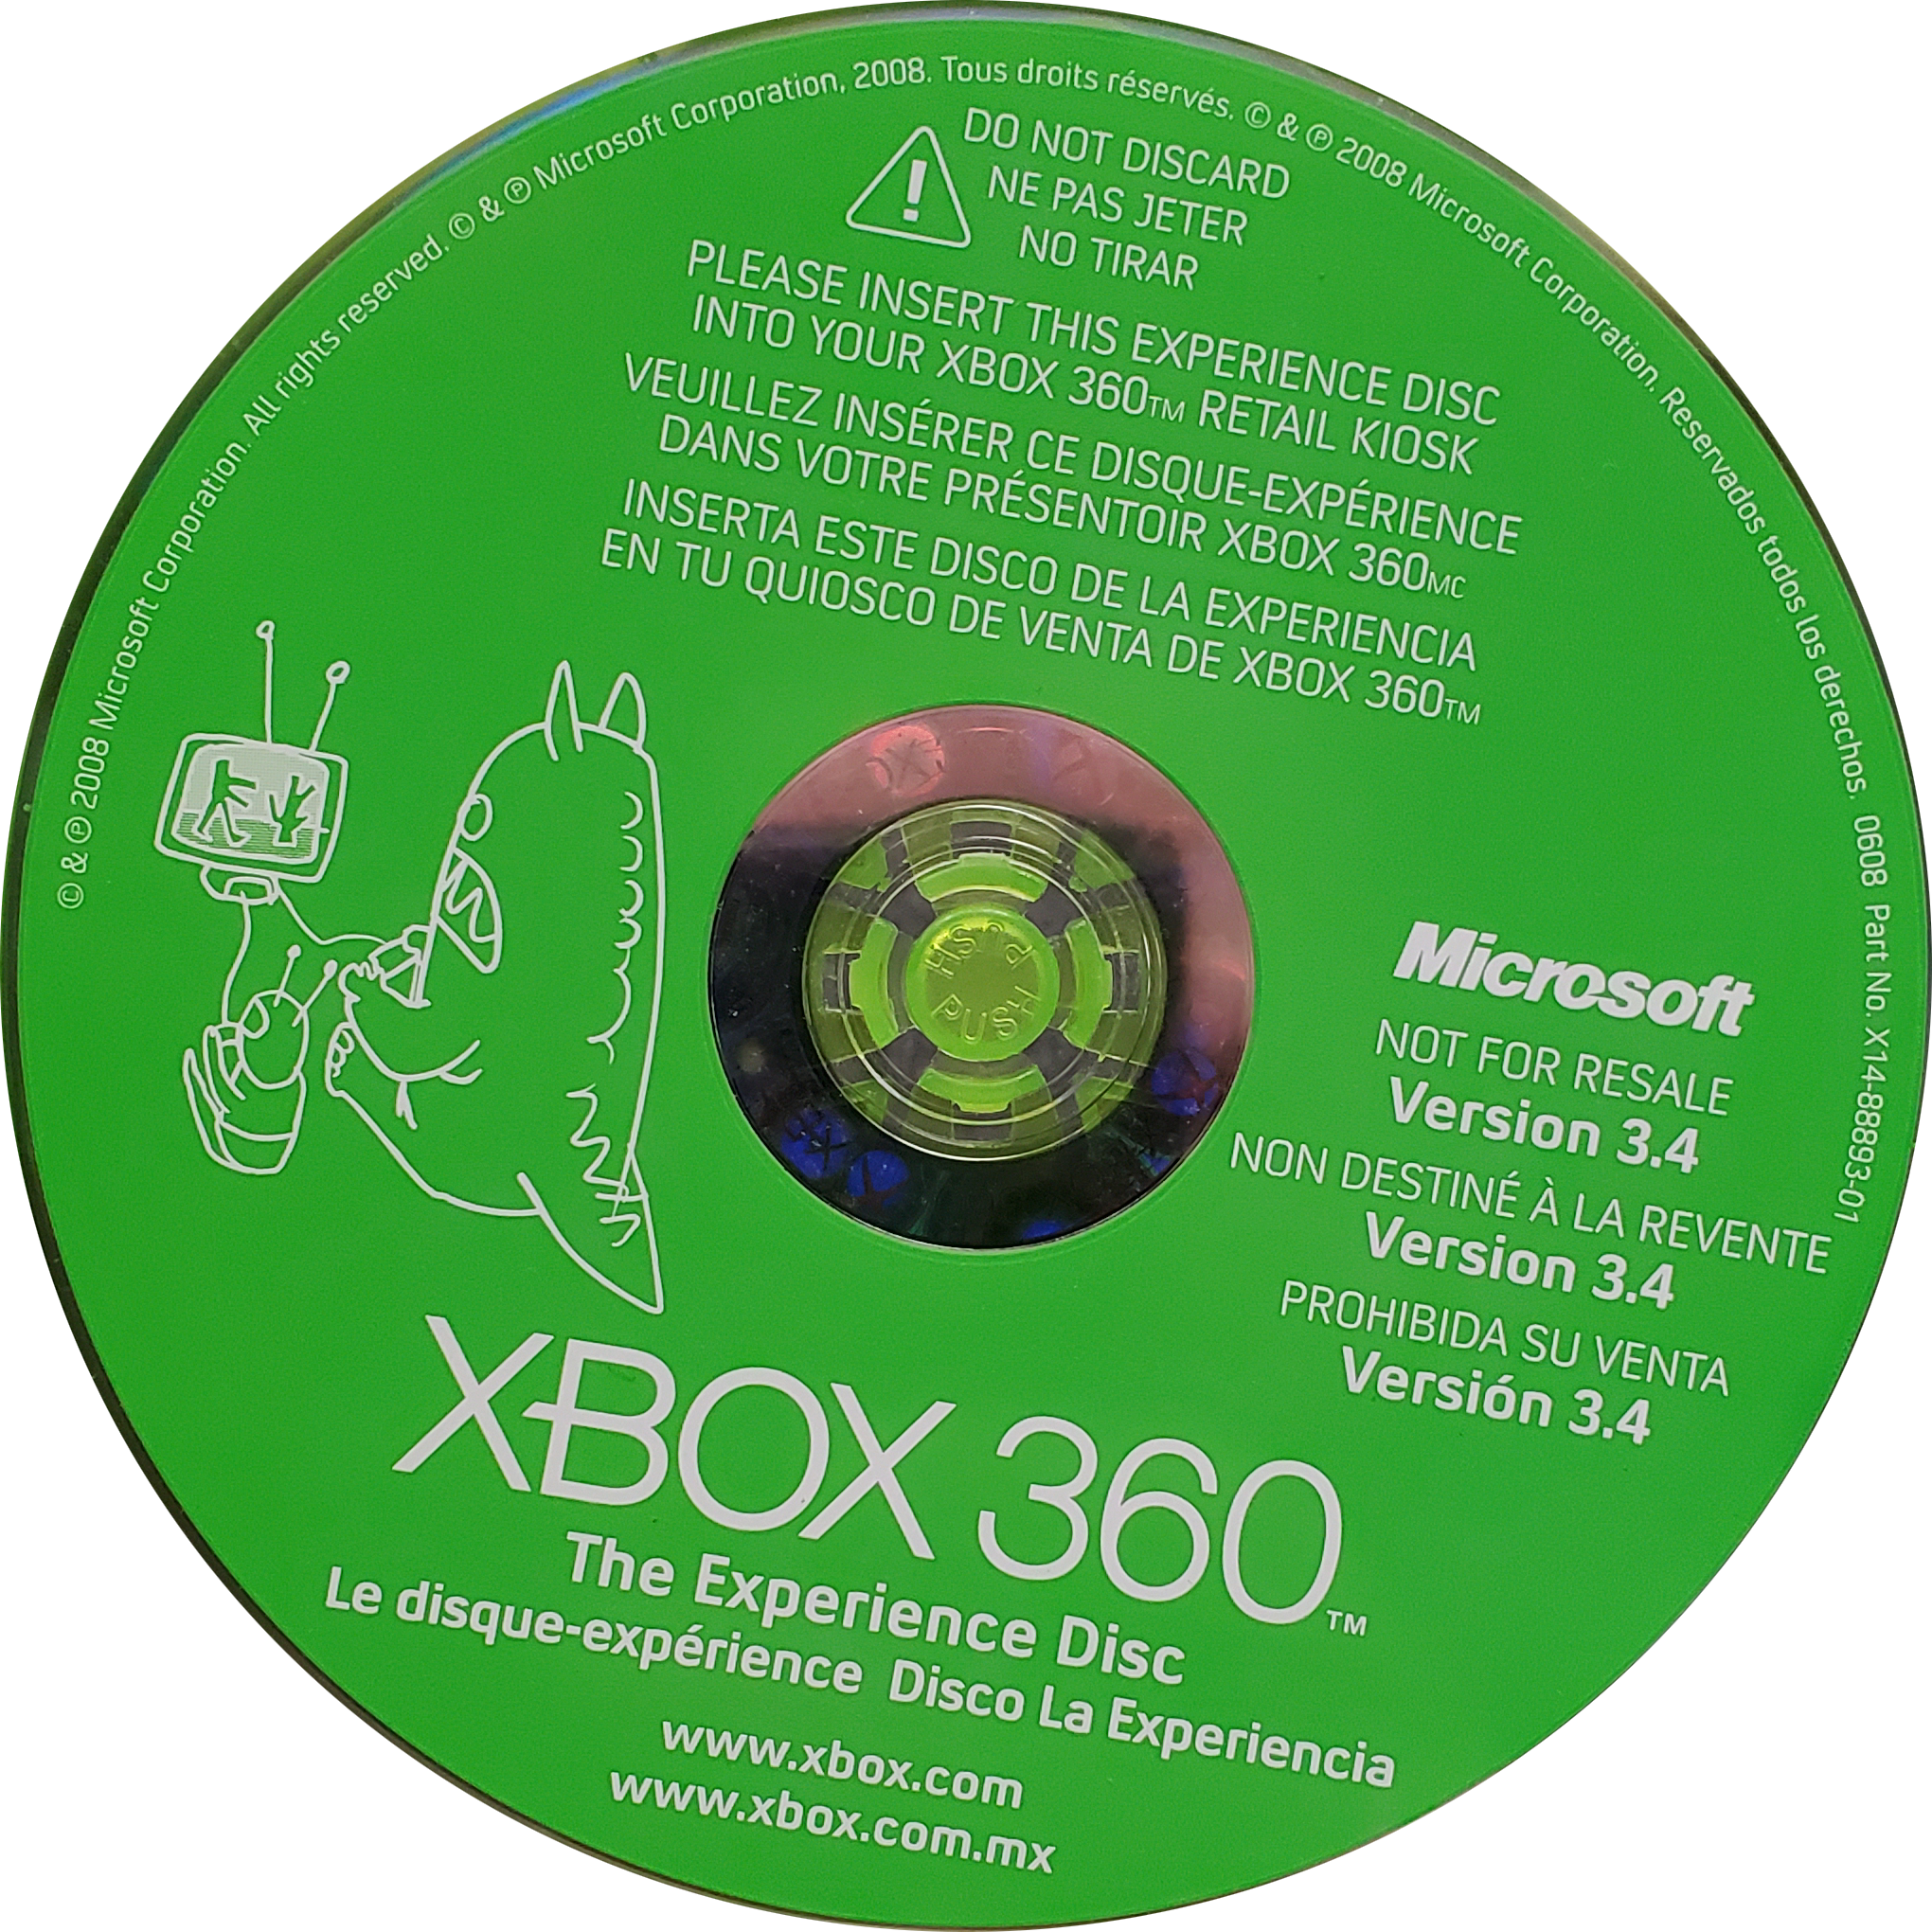 XBOX 360 - Xbox 360 The Experience Disc Version 3.4